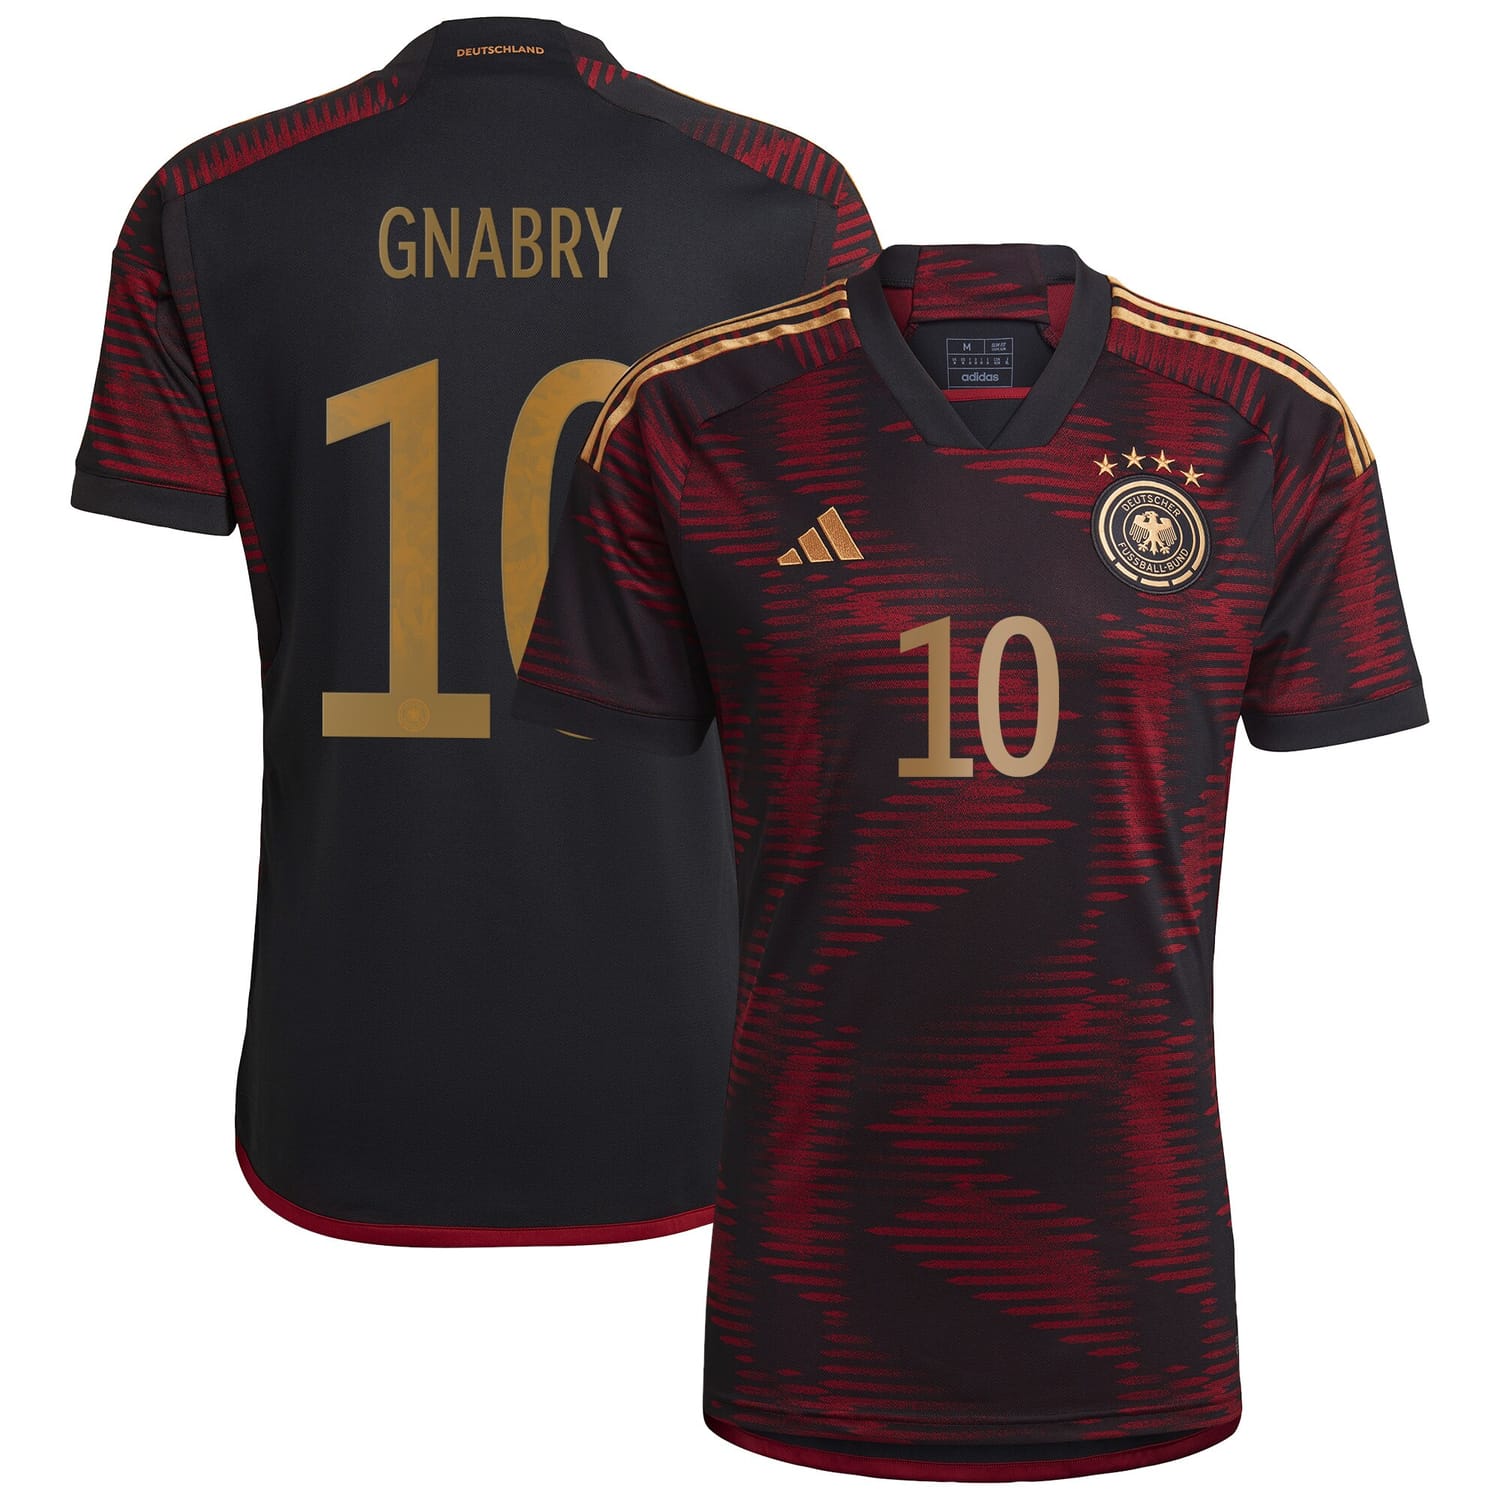 Germany National Team Away Jersey Shirt player Serge Gnabry 10 printing for Men